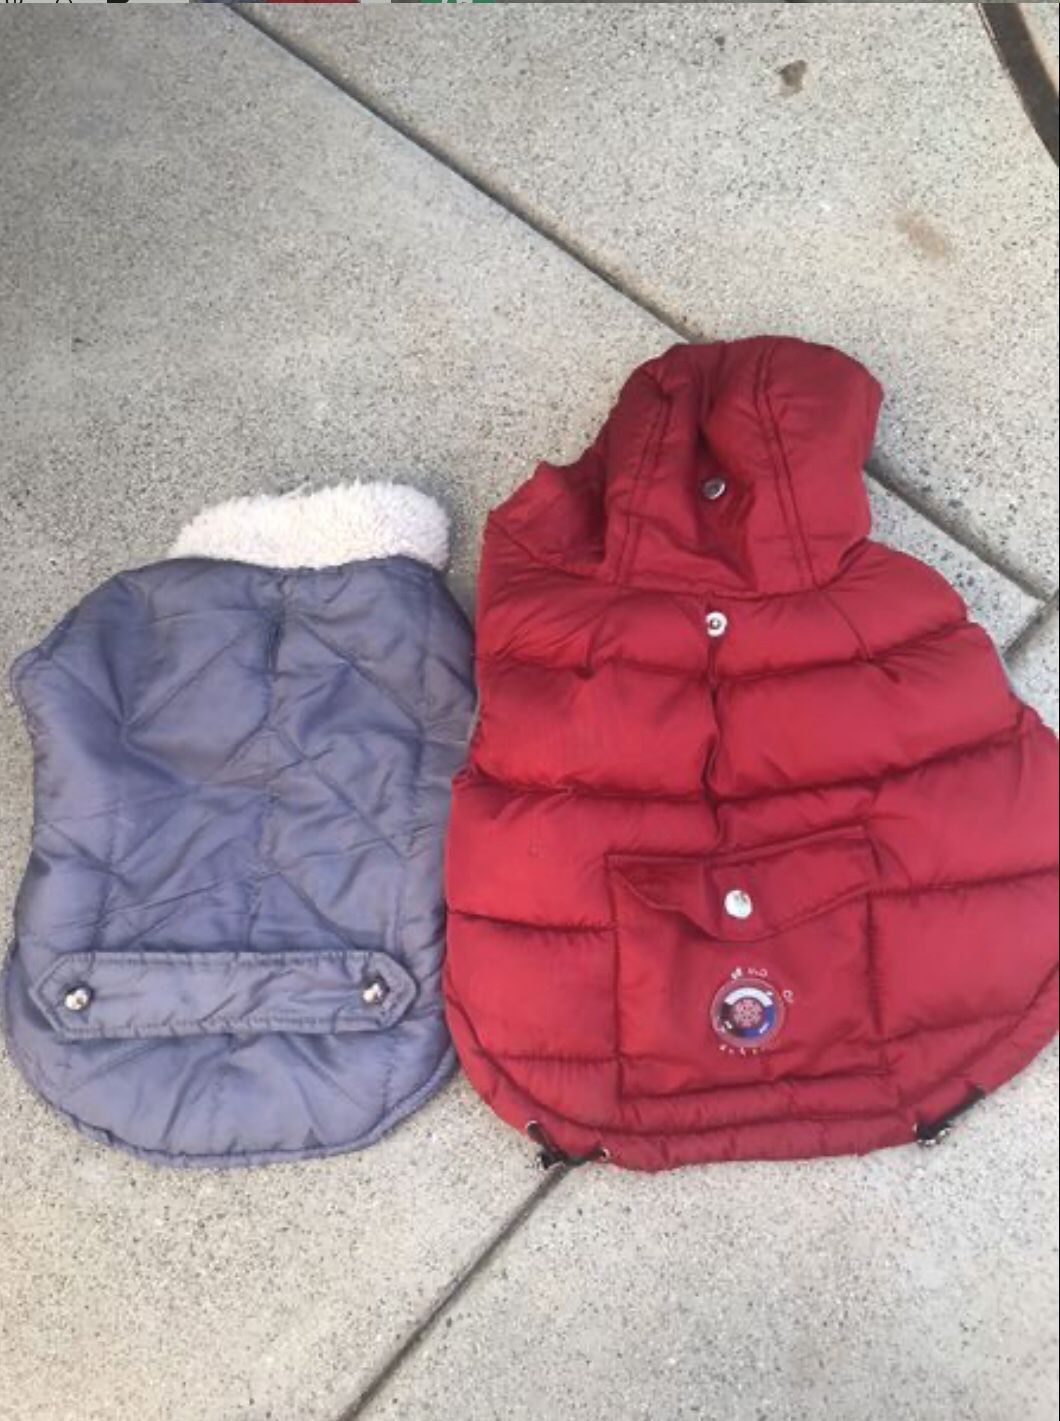 2 Small Dog’s Jackets ( for very small dogs)